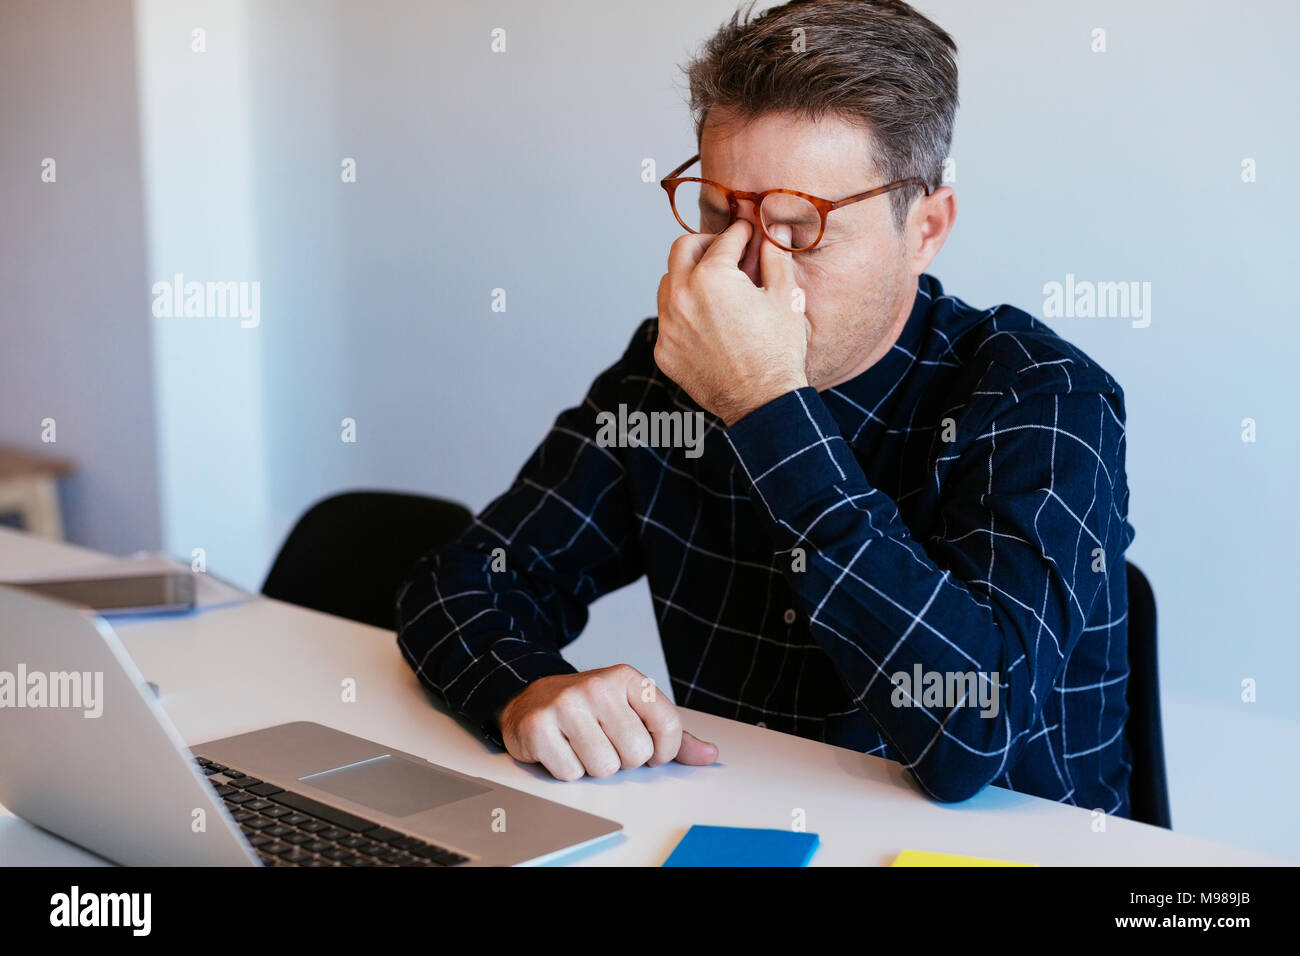 Businessman at desk in office rubbing his eyes Stock Photo